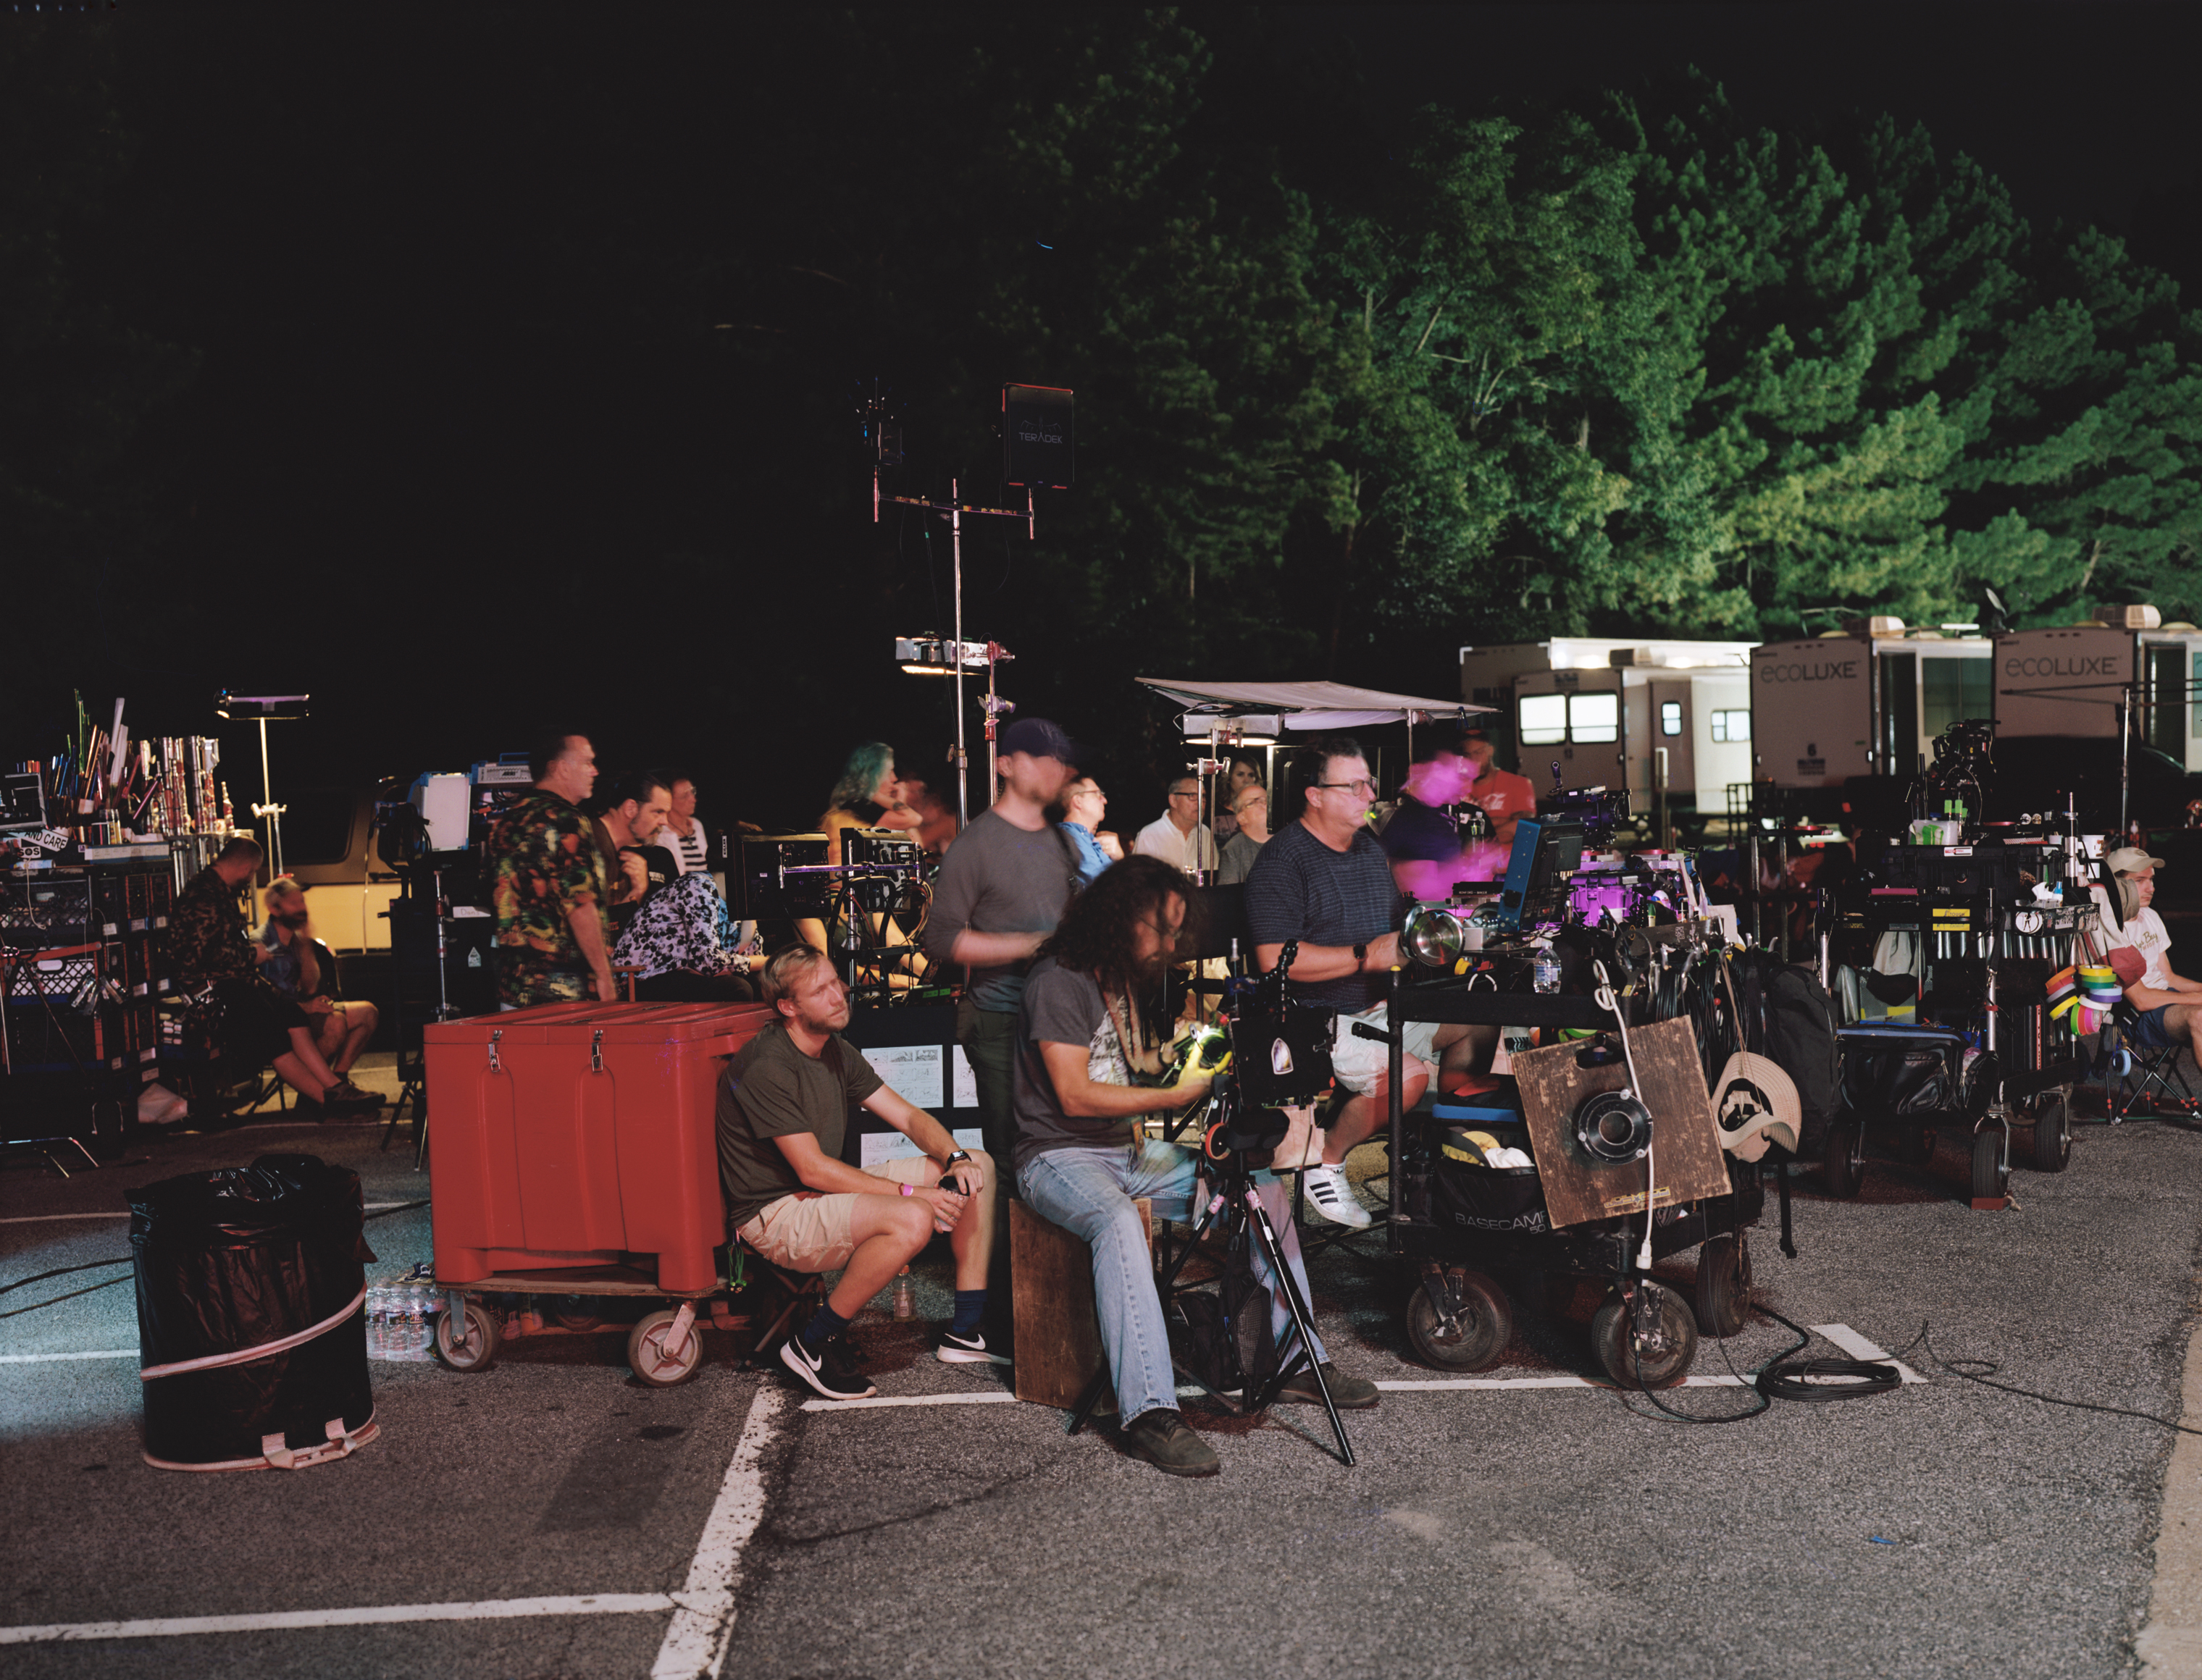 The crew prepares to film a scene on the set of Netflix’s 'Stranger Things' season 3 on location in Georgia. (RaMell Ross for TIME)